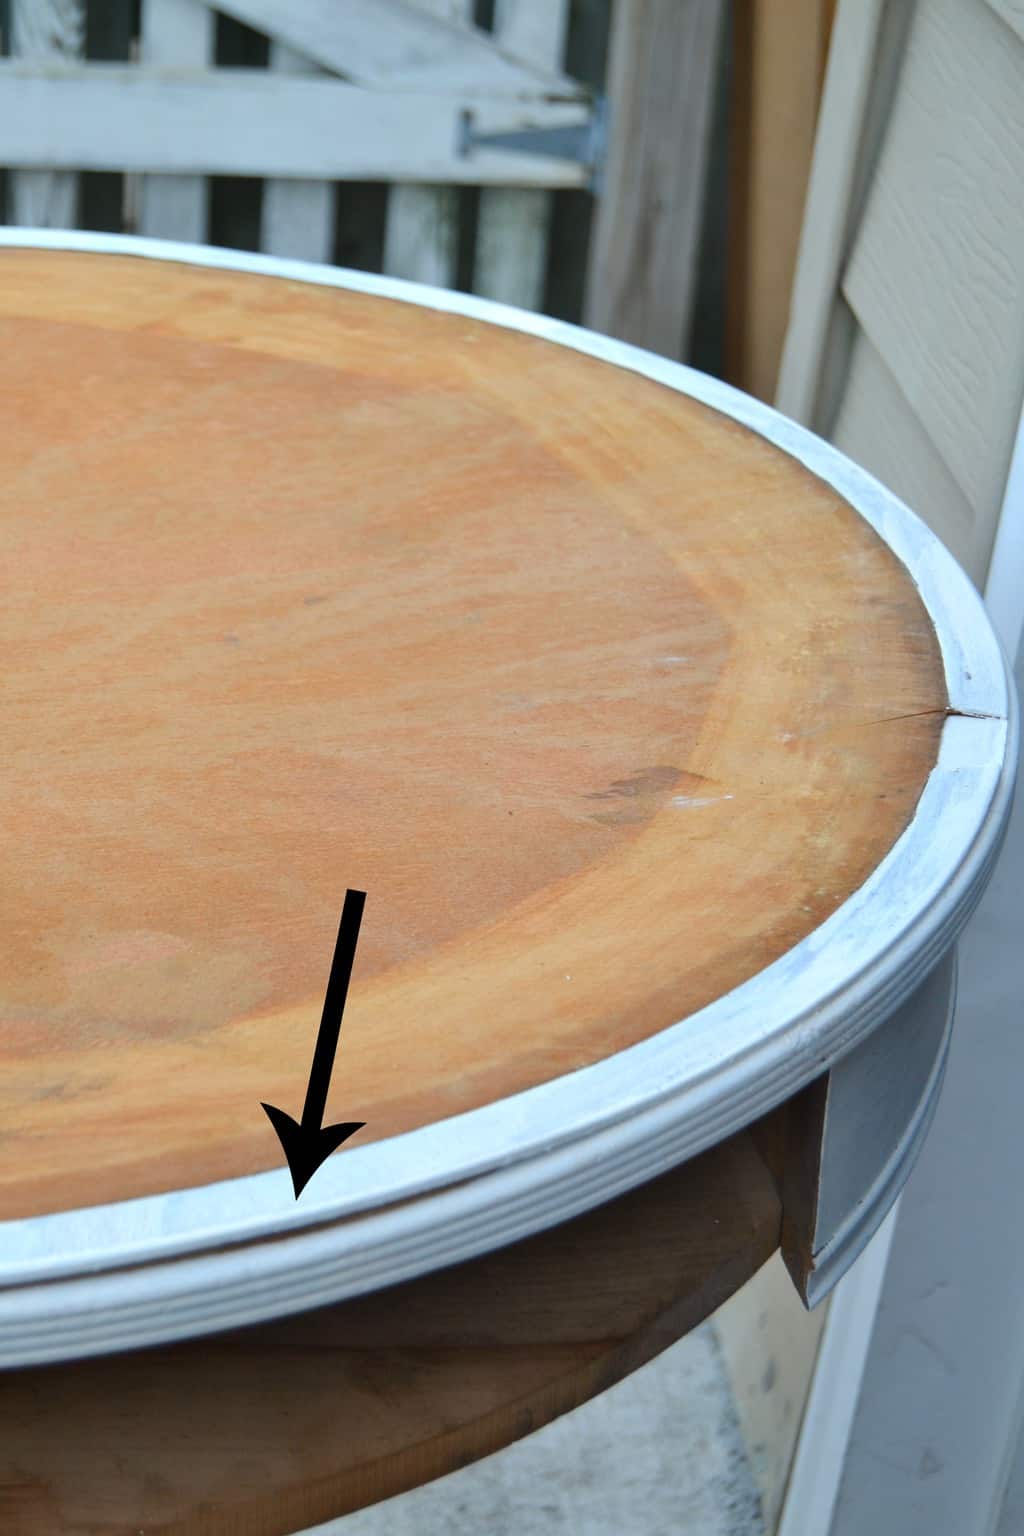 DIY Furniture: Painted Round Table - My Creative Days